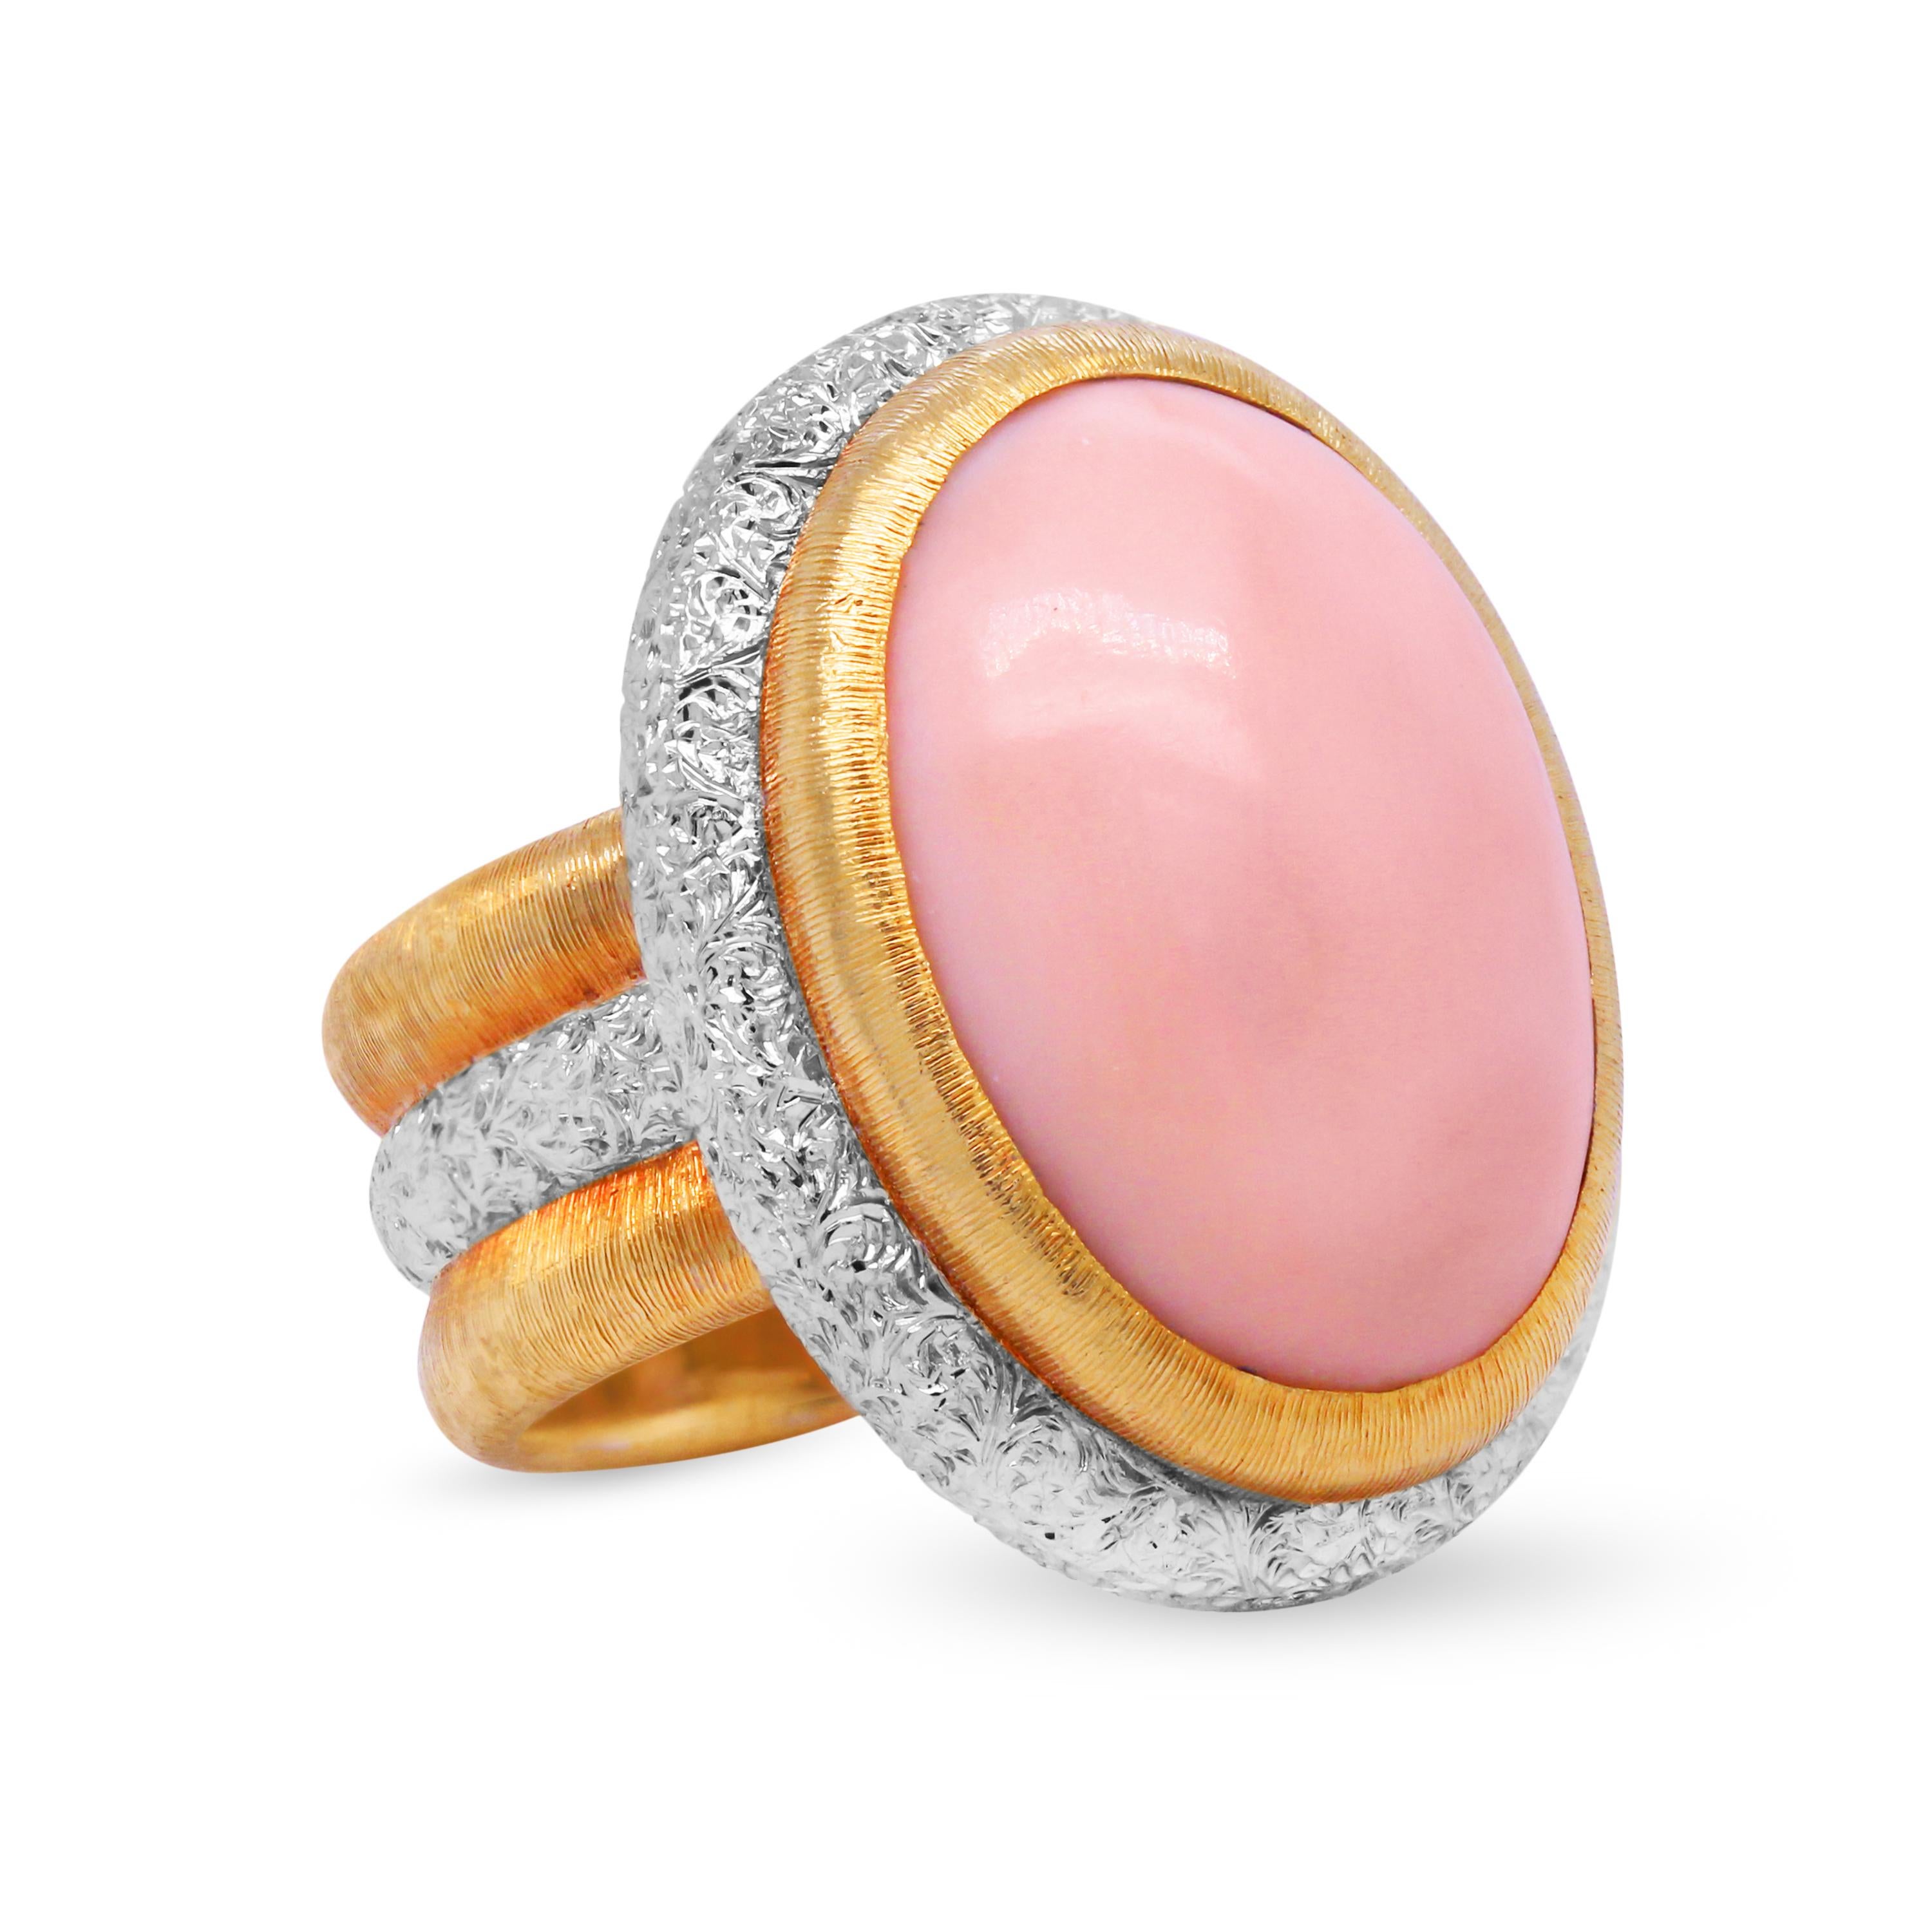 Buccellati 18 Karat Yellow White Gold Oval Cut Angel Coral Ring 

This incredible ring by Buccellati features an angel coral center with brushed yellow and textured white gold hand work shown all throughout.

Ring face is 23mm x 18mm. 9mm band